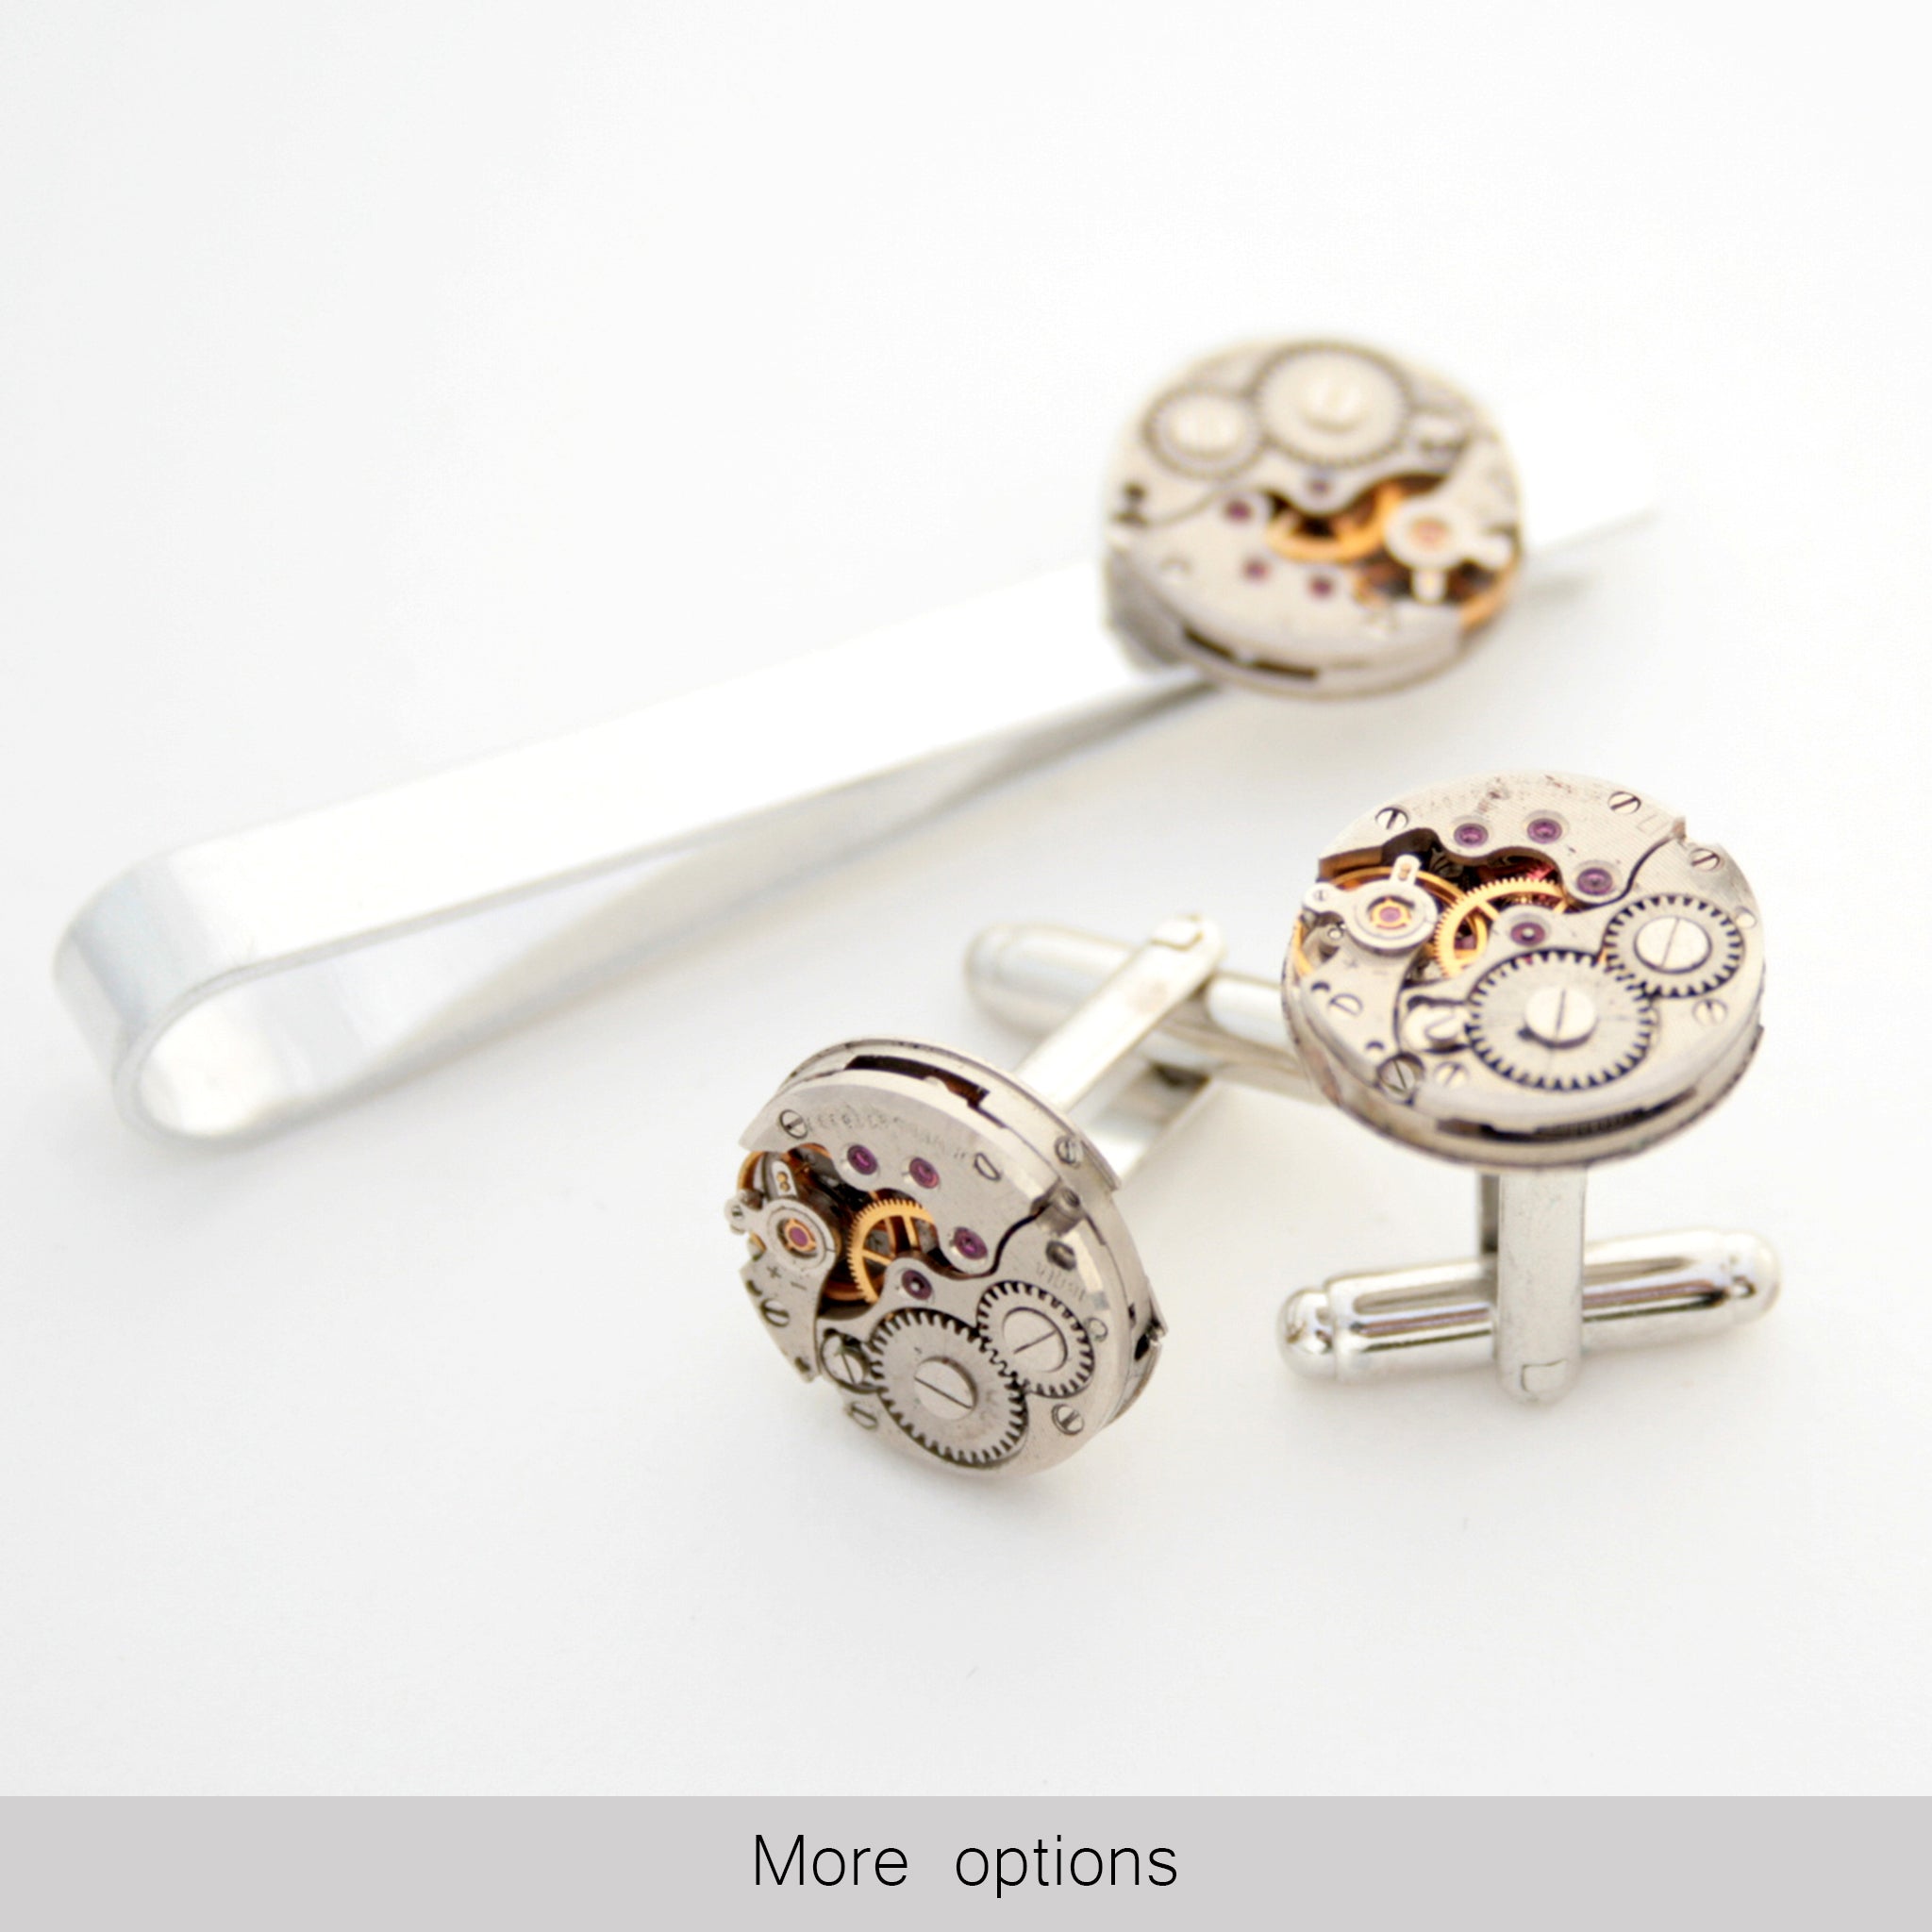 Tie Clip and Cufflinks Set featuring antique watch movements in steampunk style